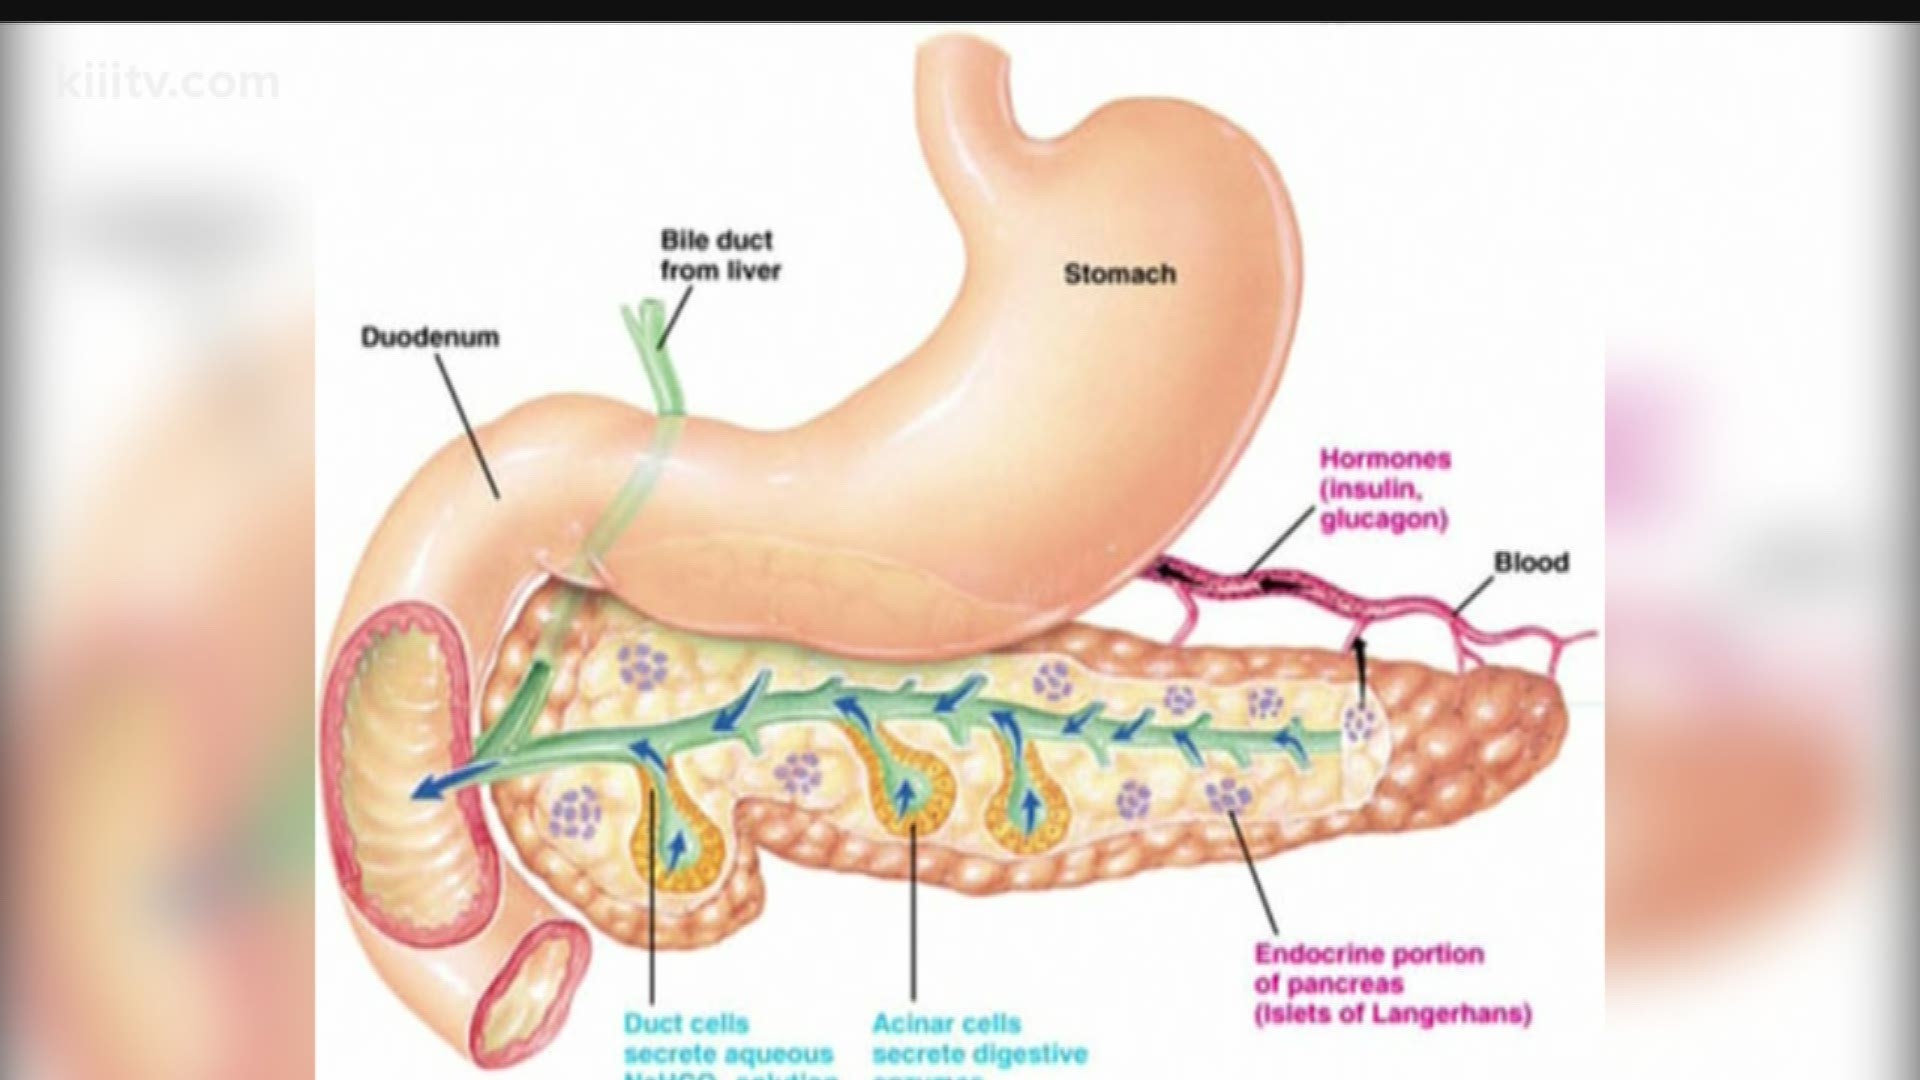 Dr. Gregg Silverman explained how the pancreas has two major functions in the body and if disrupted could cause serious problems or even death.